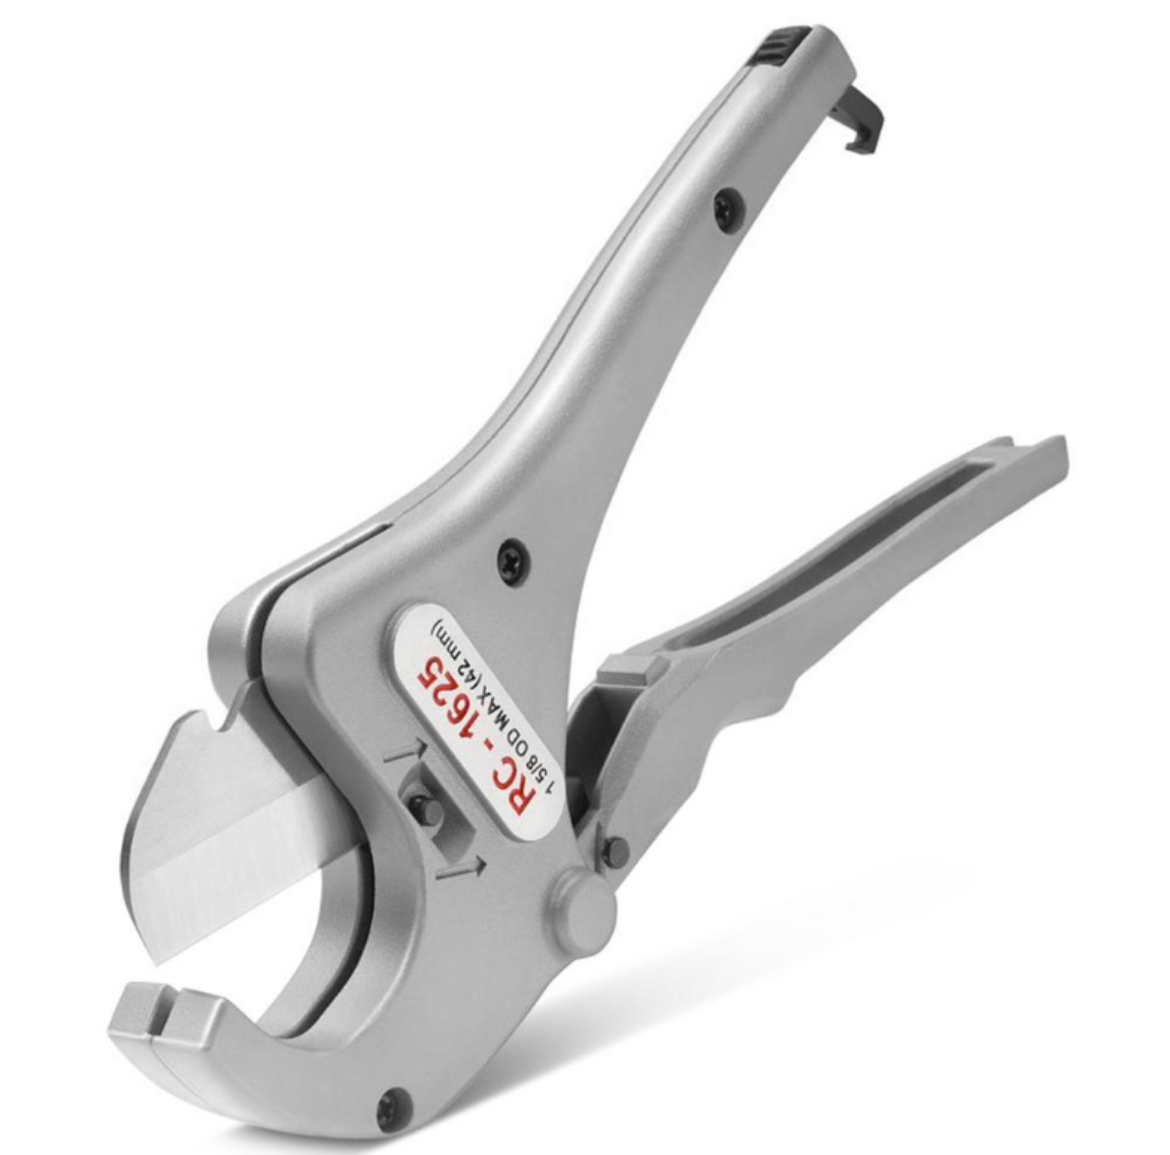 Picture of RIDGID RC 1625, 3MM-42MM Ratchet Action Tube Cutter